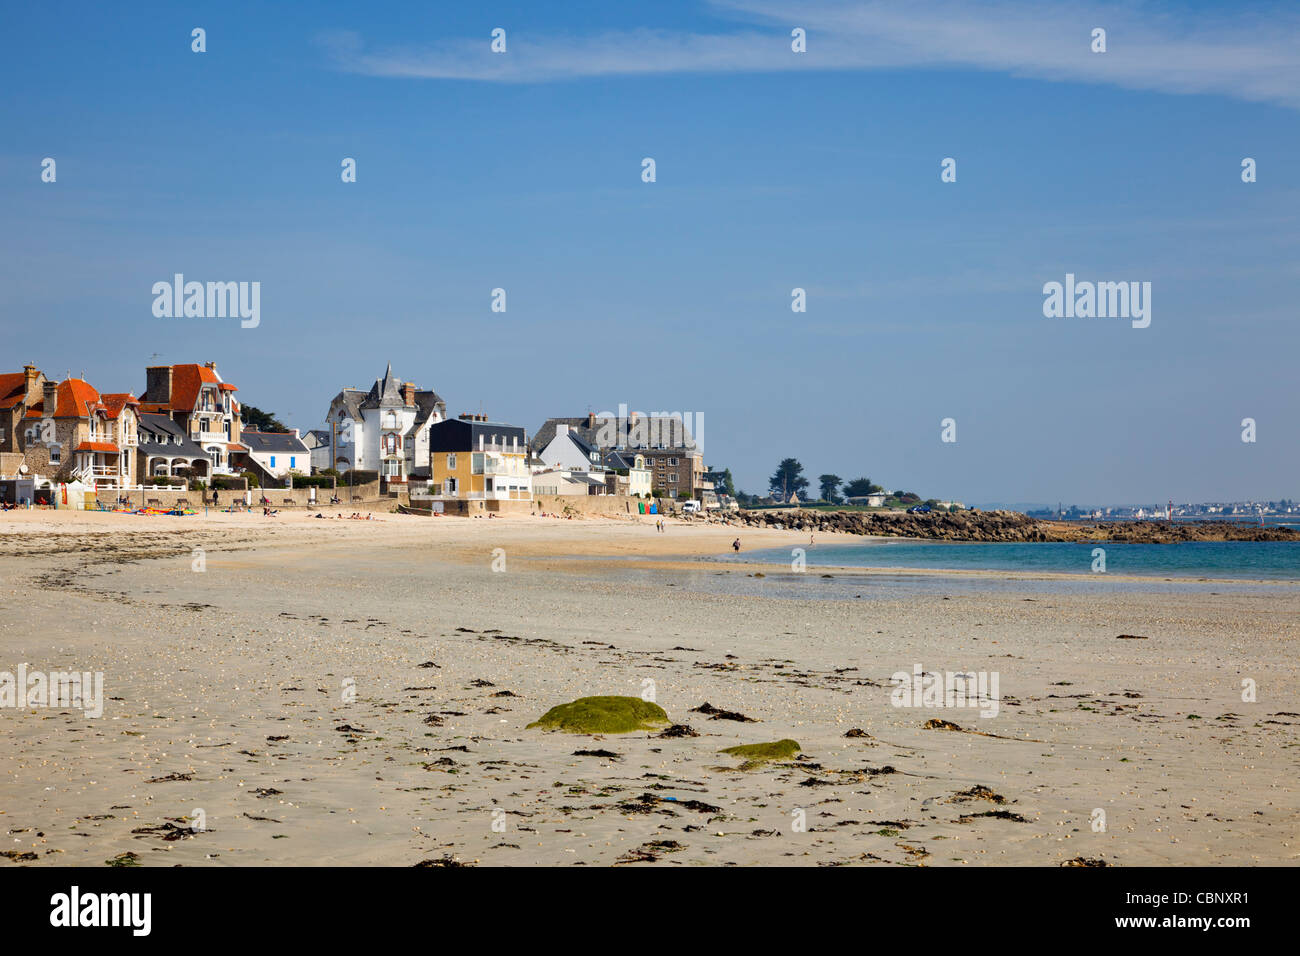 Brittany beach - Lamour Plage, Morbihan, Brittany, France Stock Photo